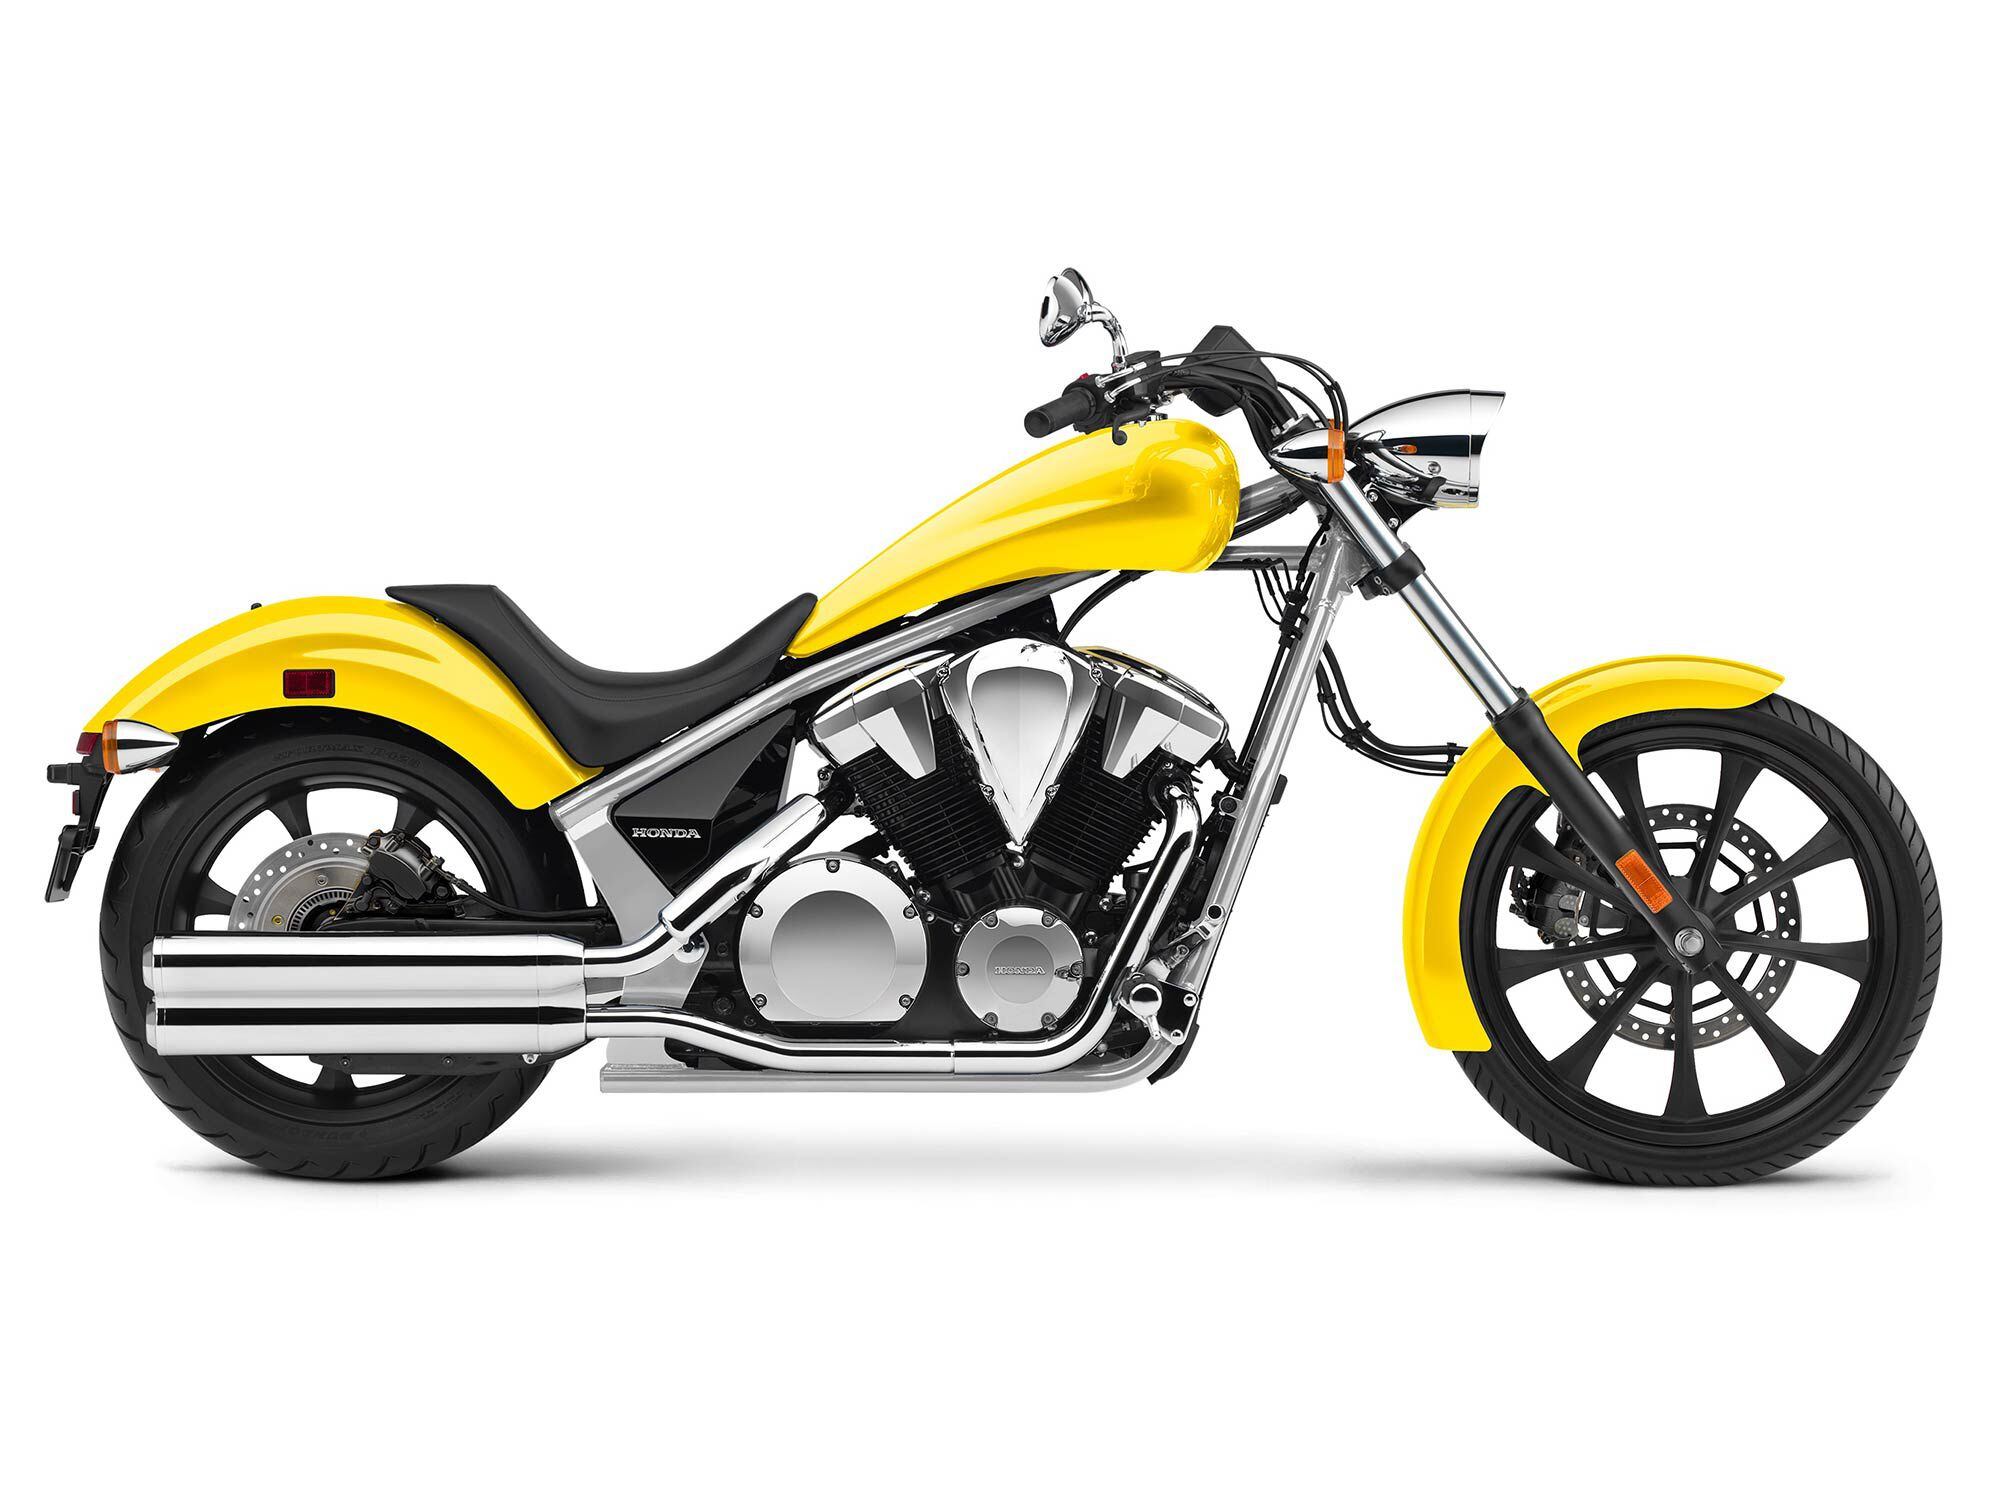 The Honda Fury has a raked-out chopper look right off the dealer floor.